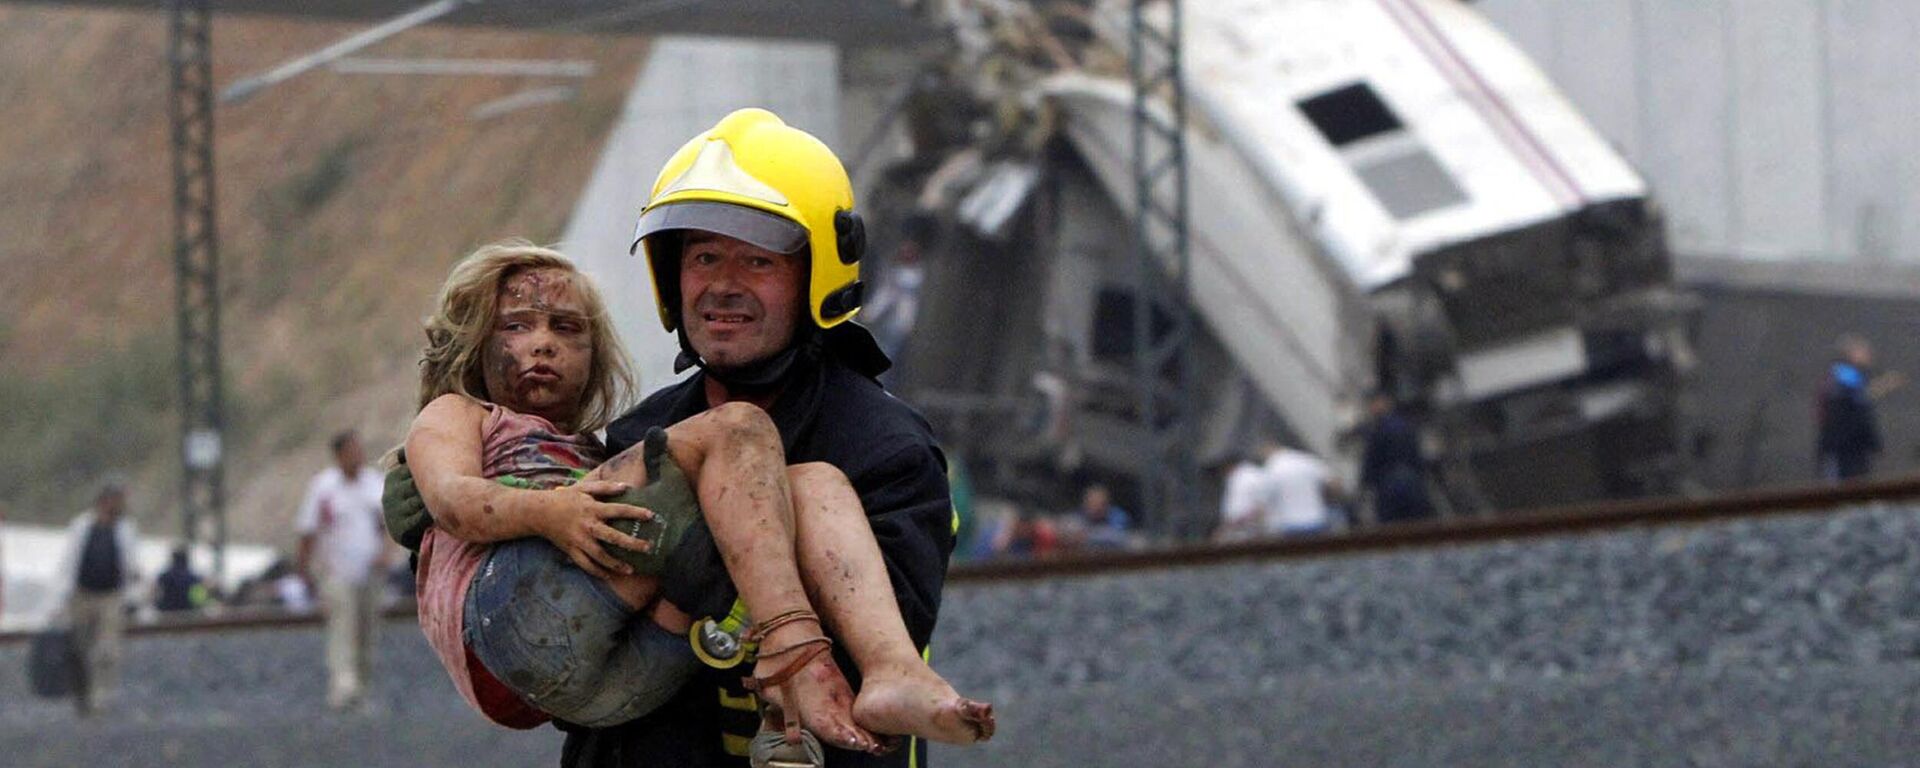 A picture taken on July 24, 2013 shows a fireman carrying an injured young girl following a train accident near the city of Santiago de Compostela.  - Sputnik International, 1920, 04.03.2023